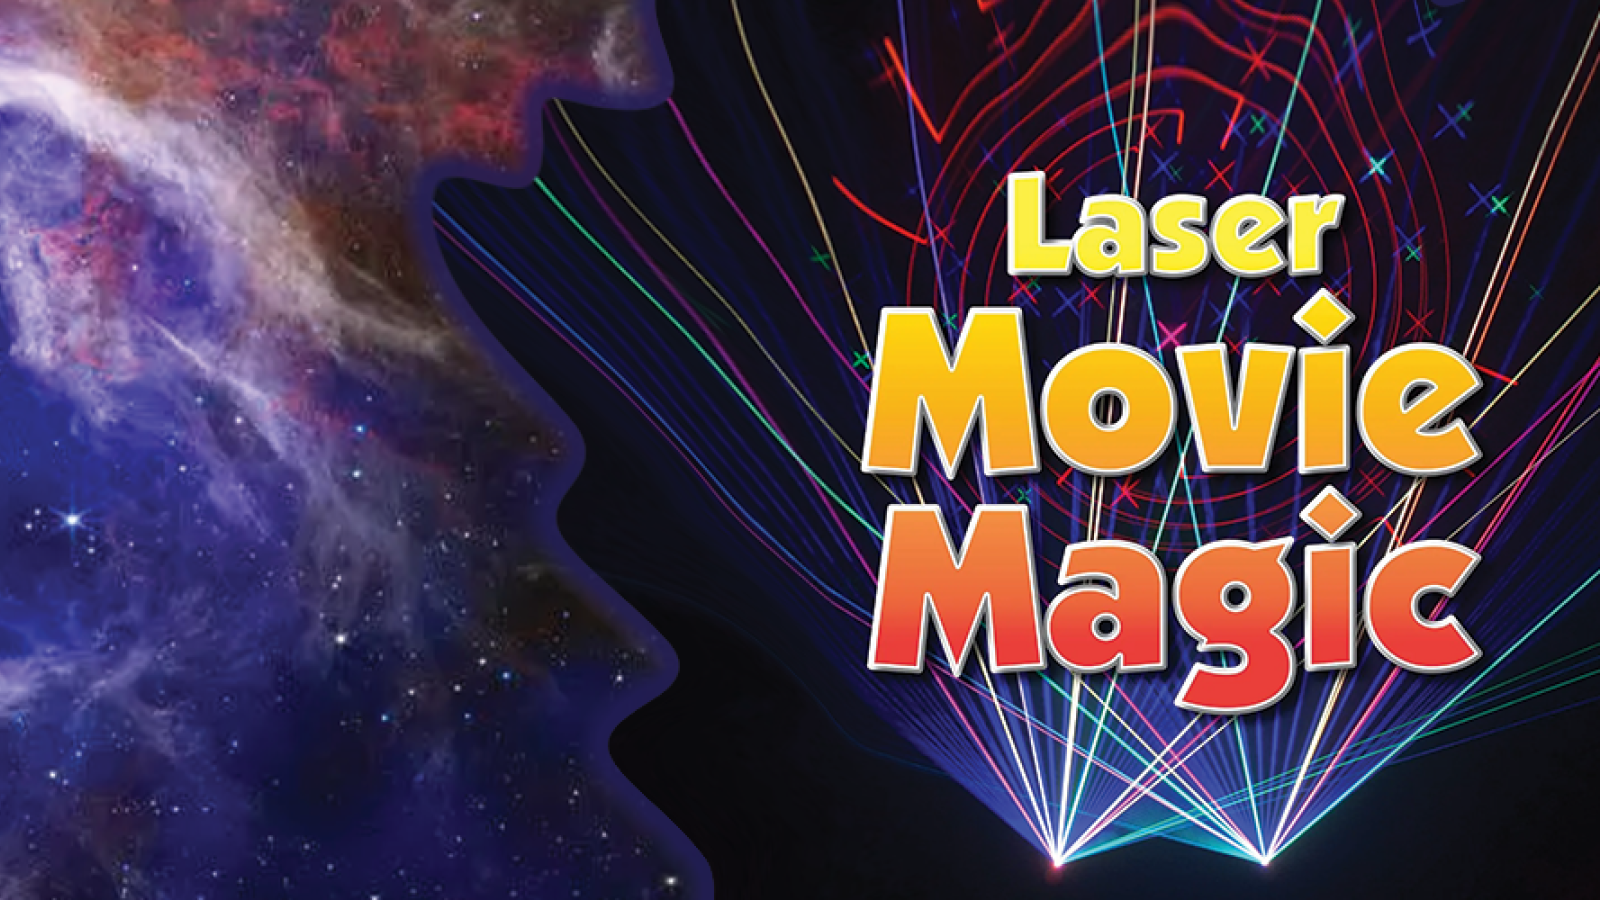 Photo of a nebula on the left with lasers on the right and text laser movie magic